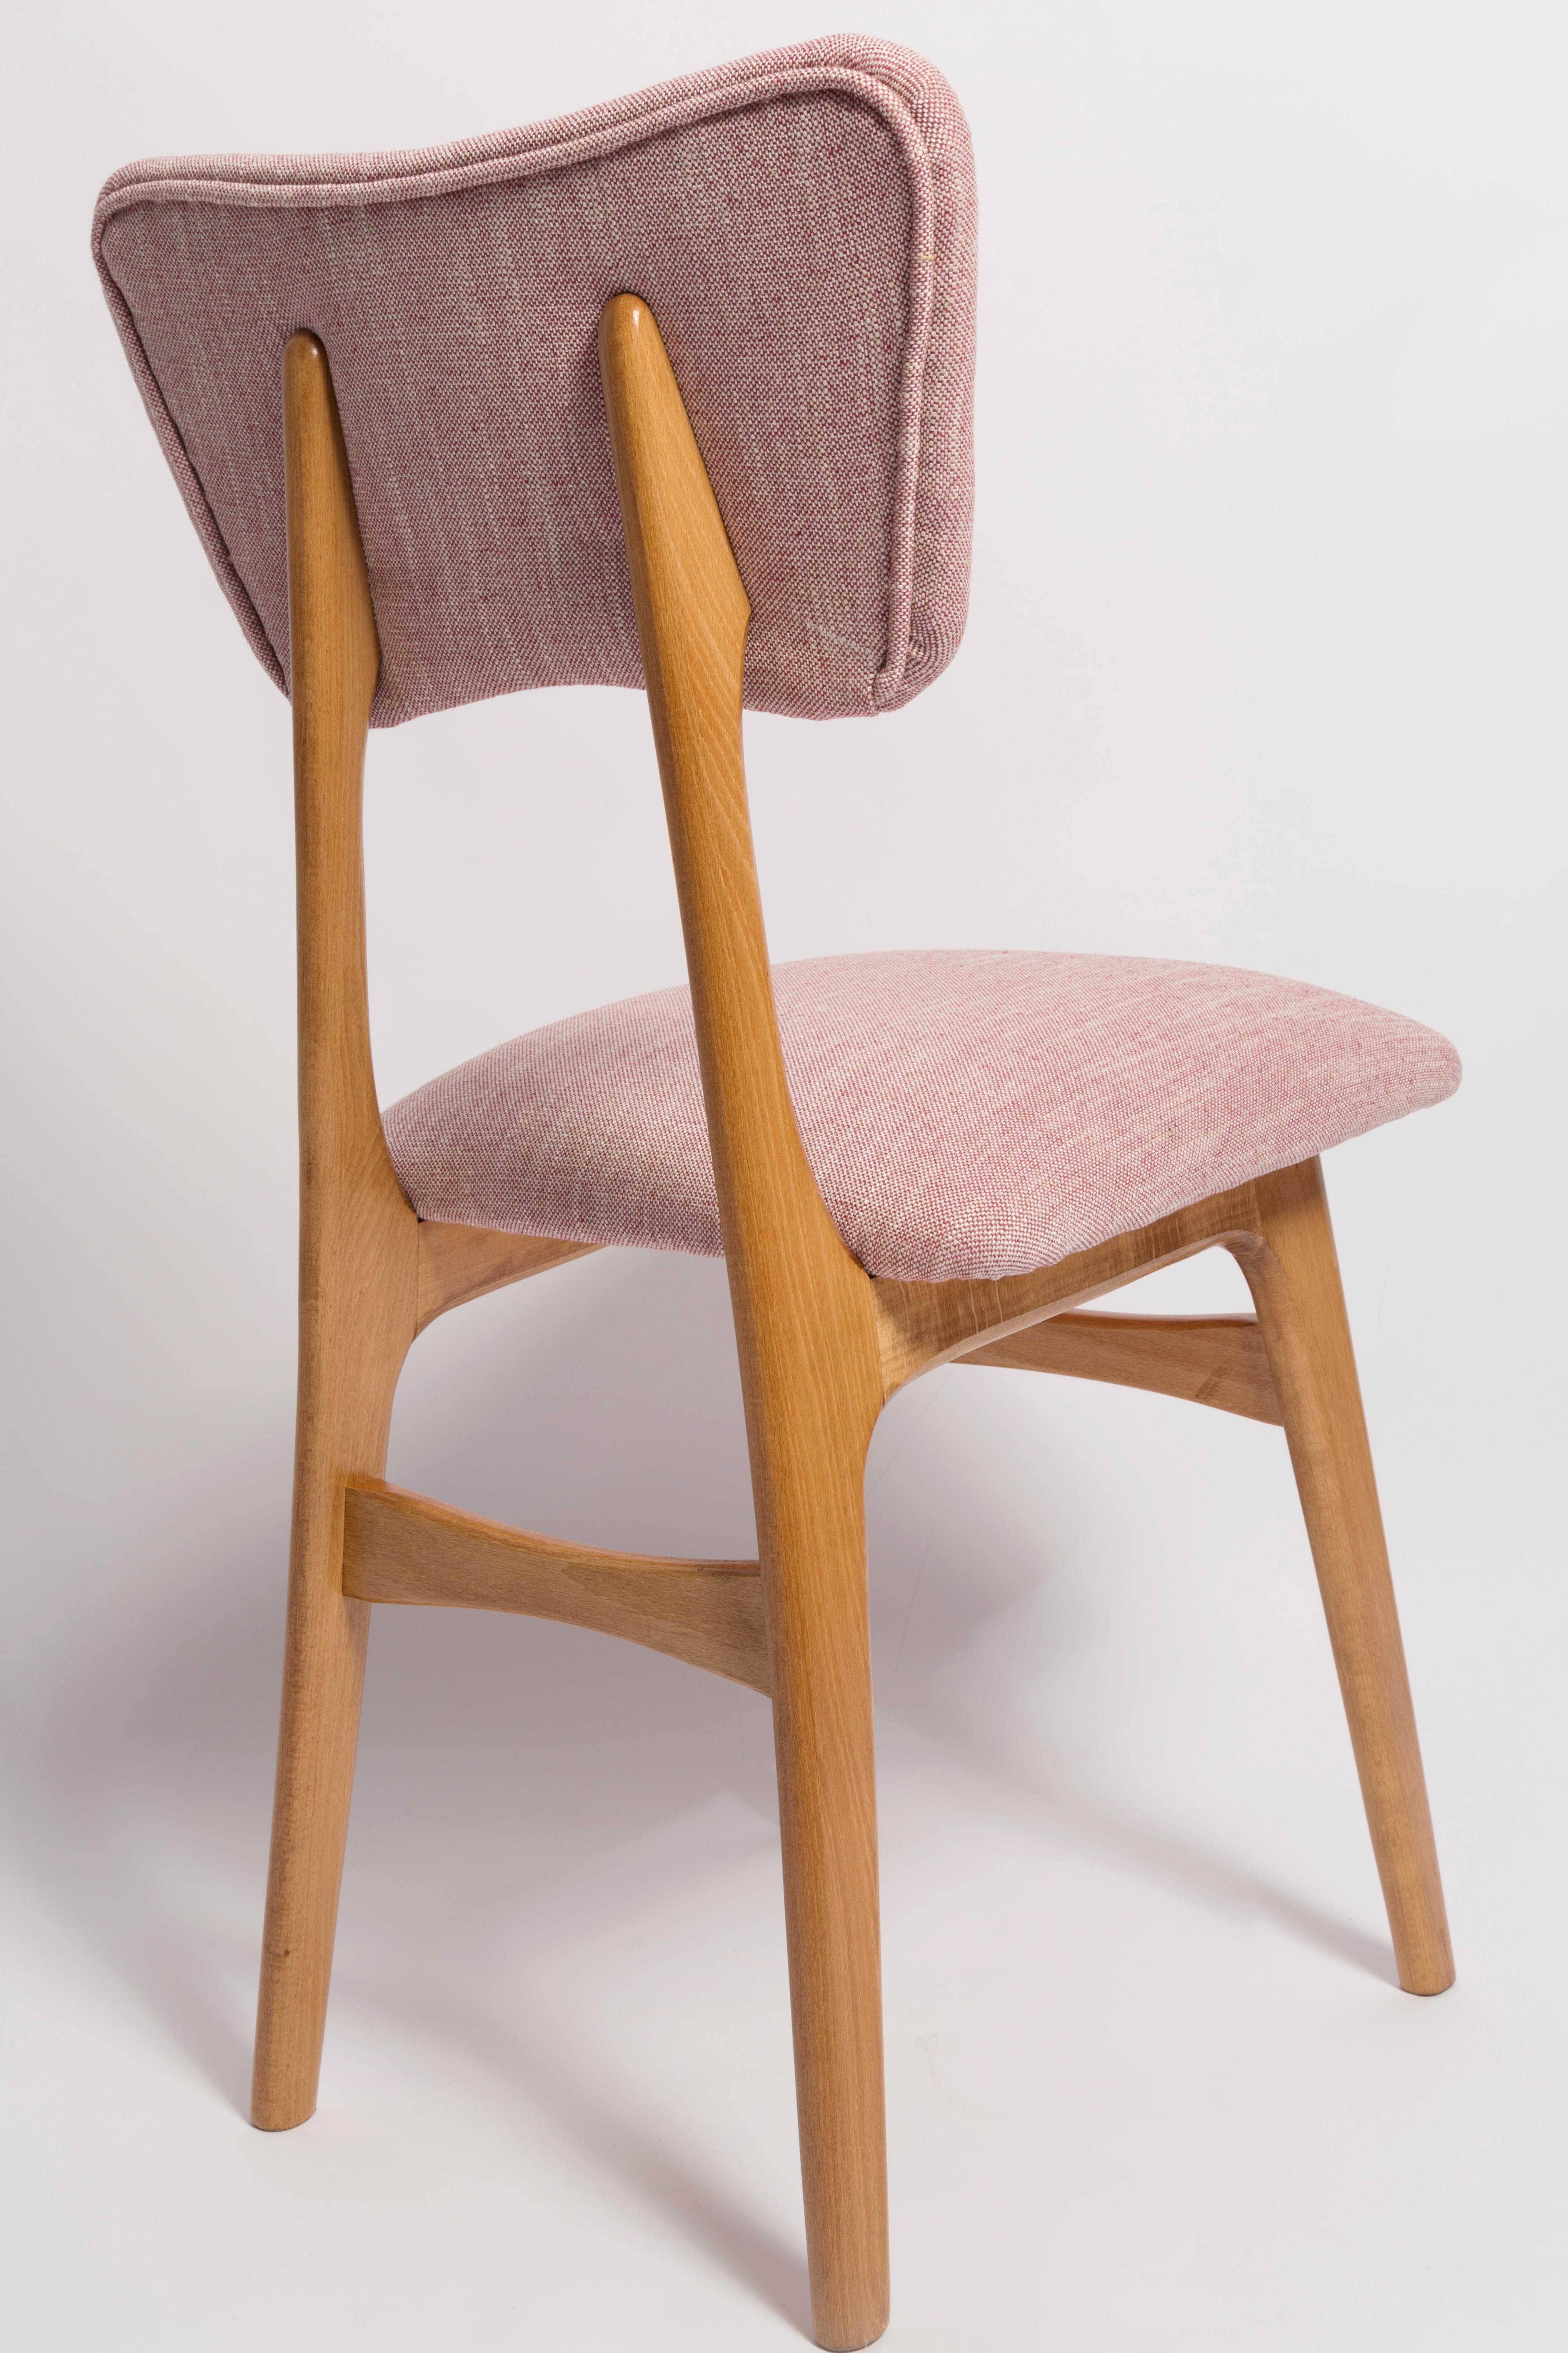 20th Century Mid Century Butterfly Dining Chair, Pink Linen, Light Wood, Europe, 1960s For Sale